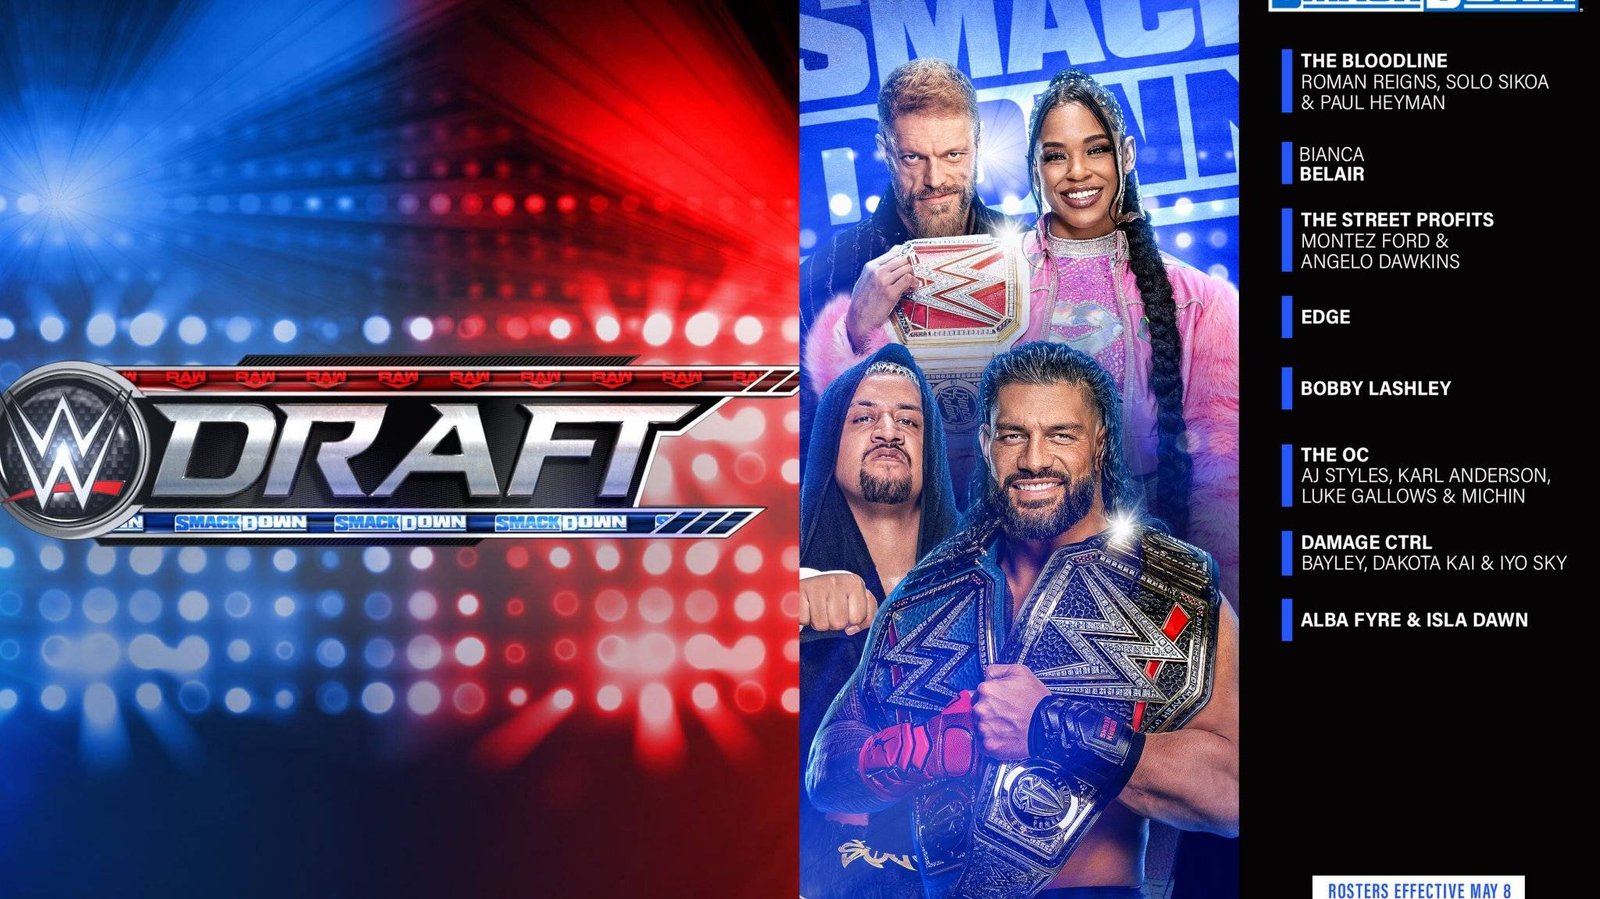 Dave Meltzer Makes His Predictions For The WWE Draft